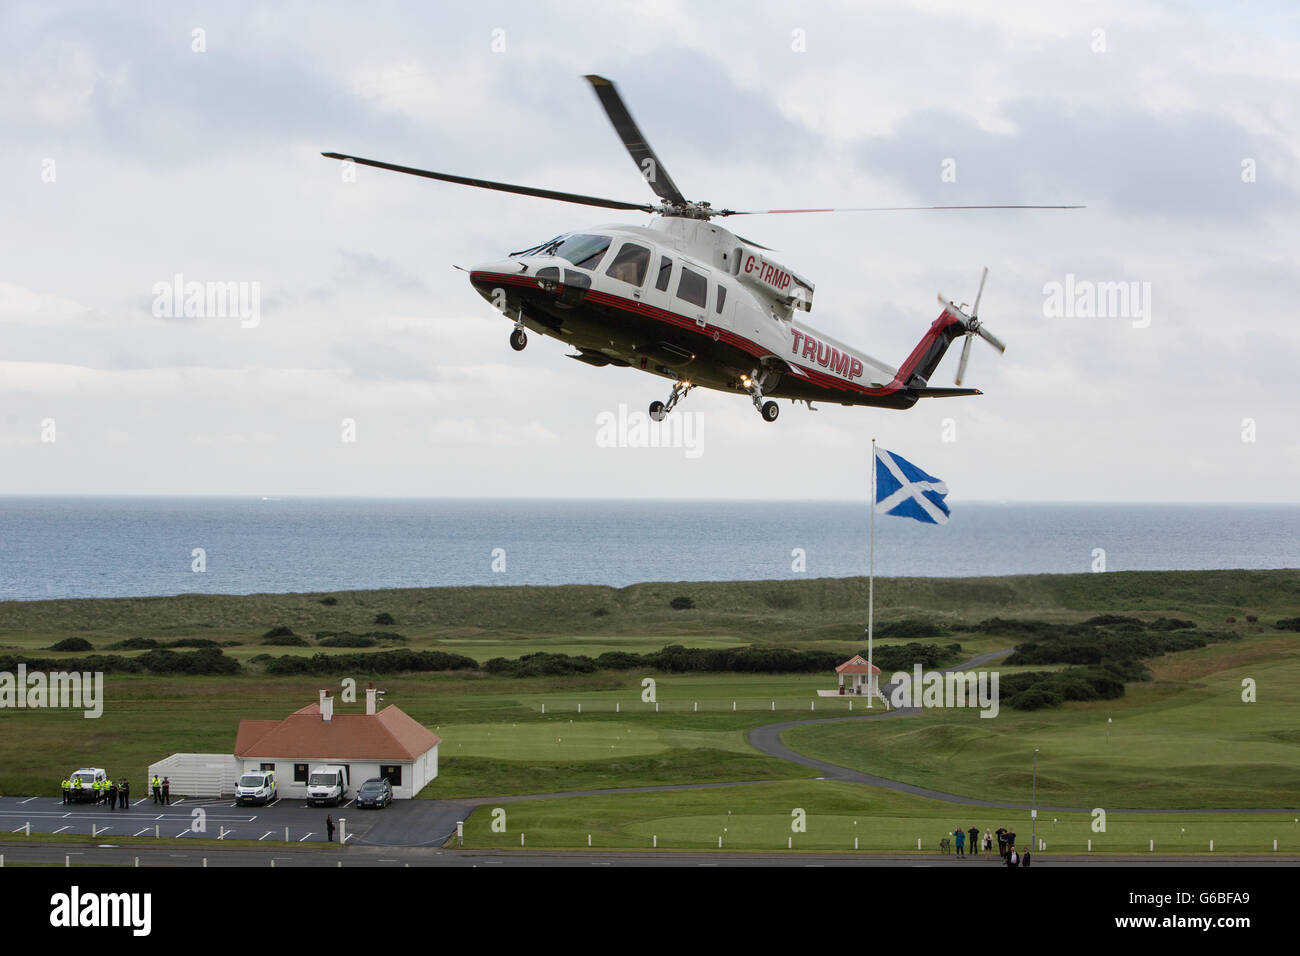 Republic presidential nominee Donald Trump arrives by helicopter, with his family members, at his Turnberry Golf Course, in Turnberry, Scotland, on 24 June 2016. Stock Photo